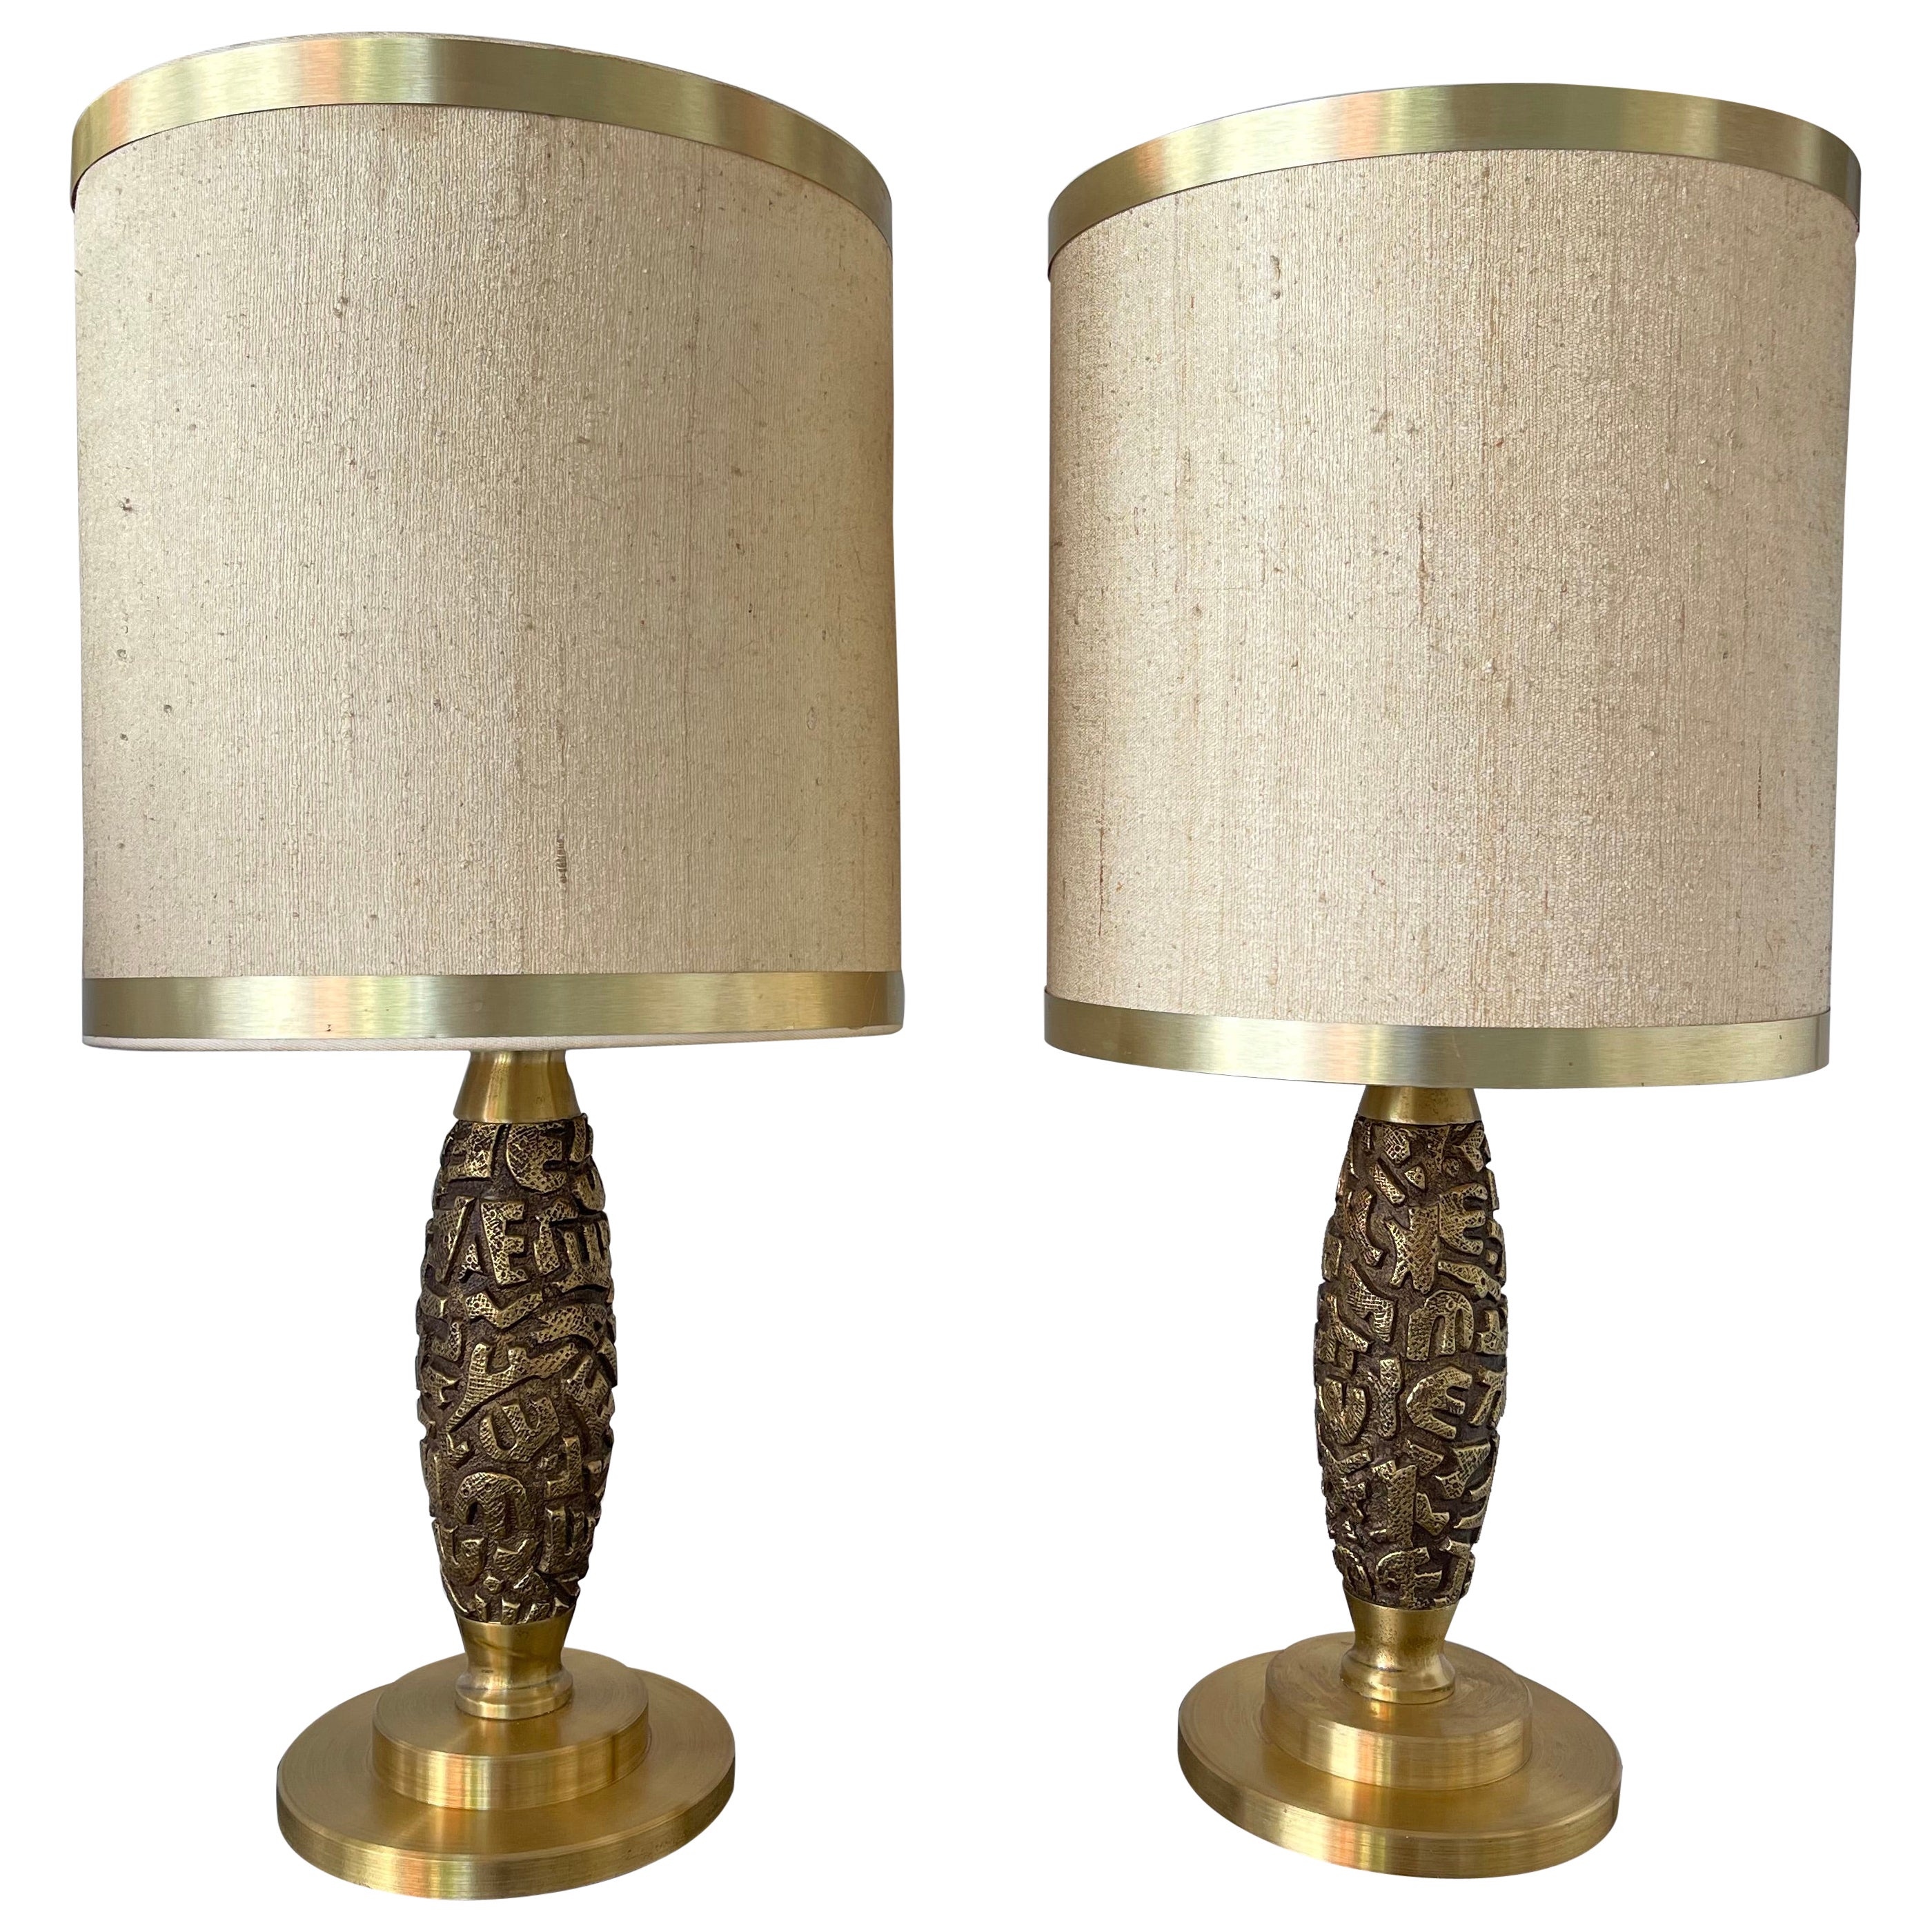 Mid-Century Modern Pair of Brass Lamps by Luciano Frigerio, Italy, 1970s